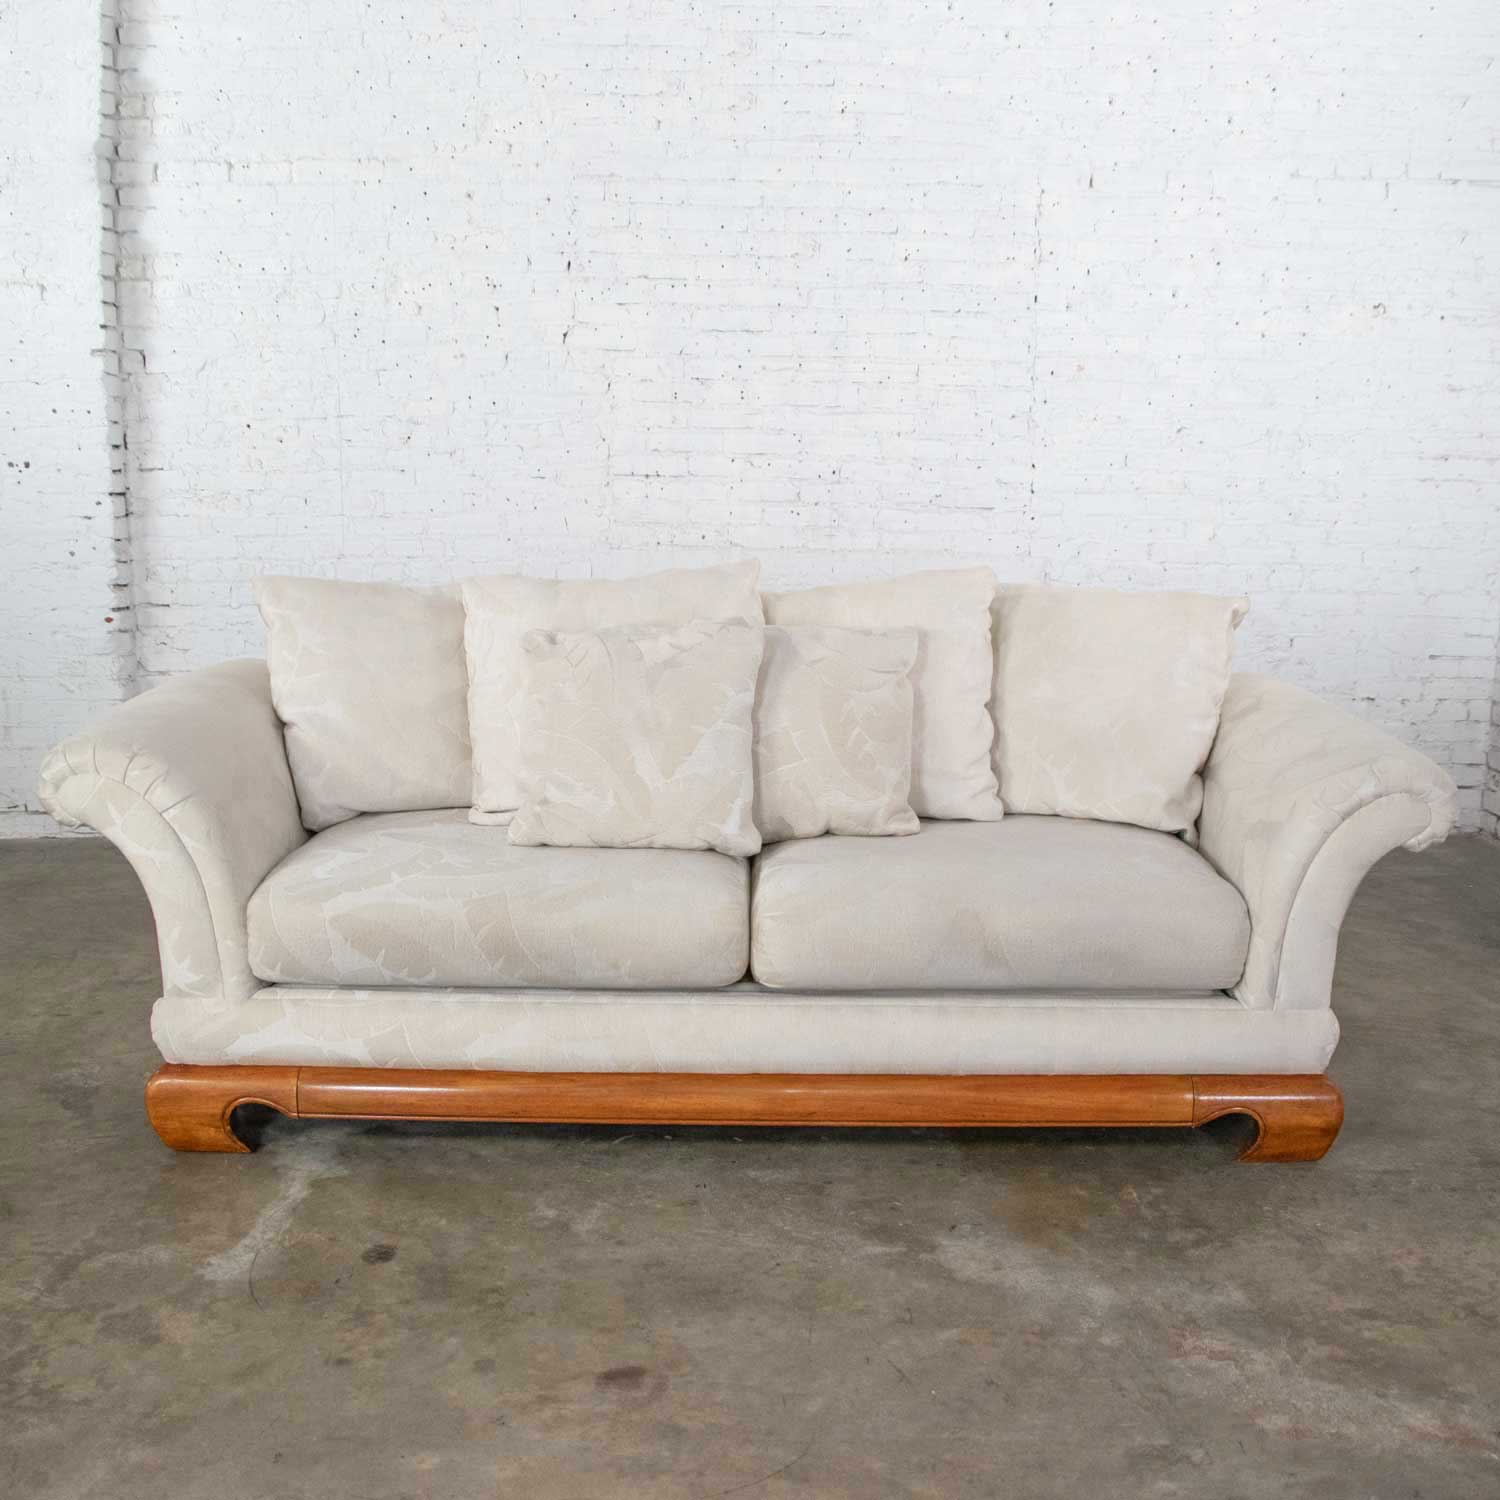 Chinoiserie Chow Leg Ming Style Sofa by Schnadig International Furniture Hollywood Regency Flair